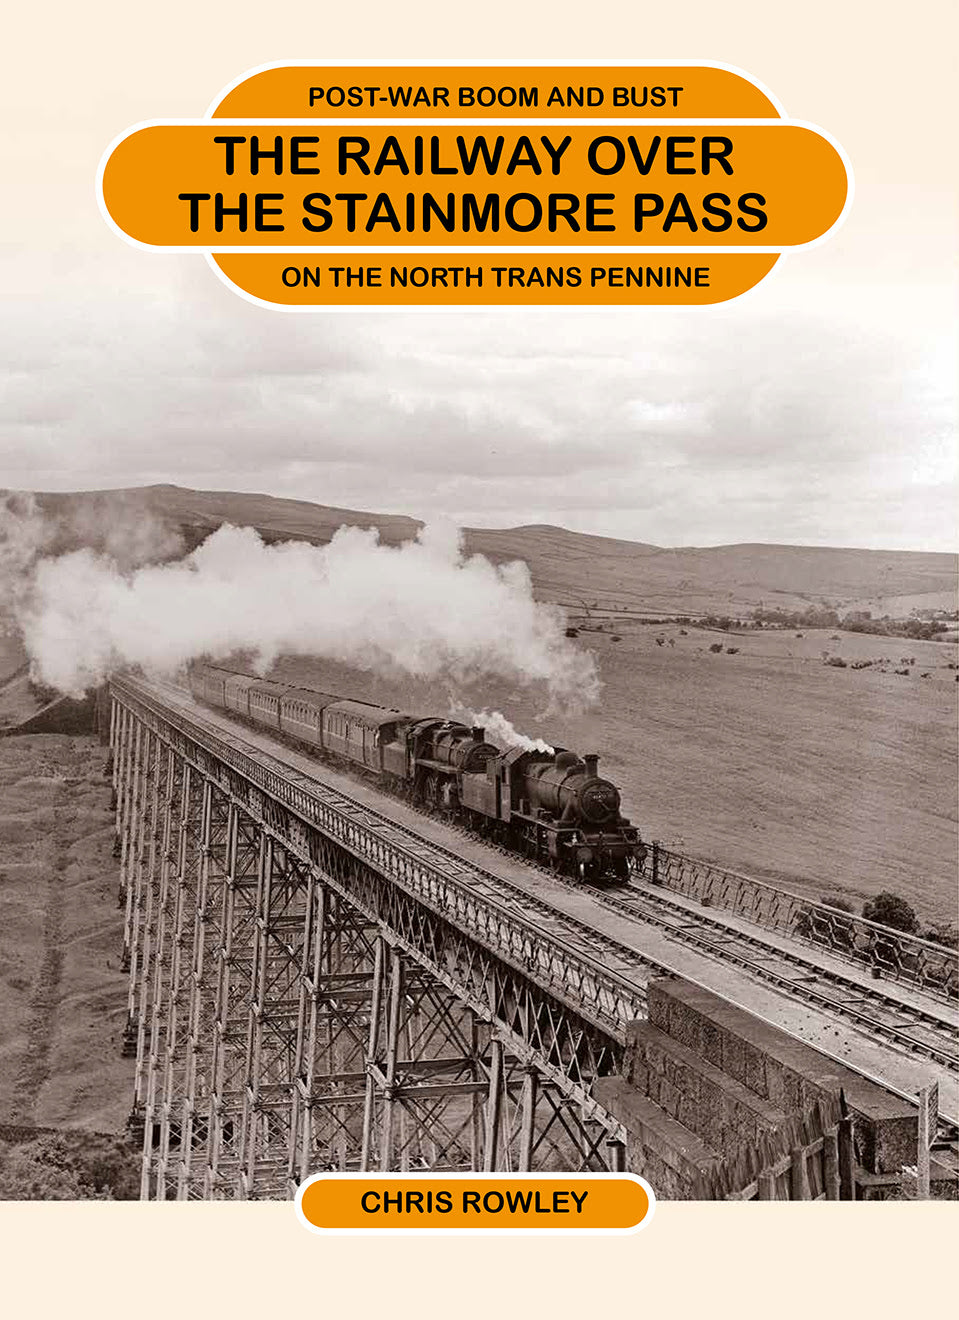 The Railway Over the Stainmore Pass Post-War Boom and Bust on the North Trans Pennine